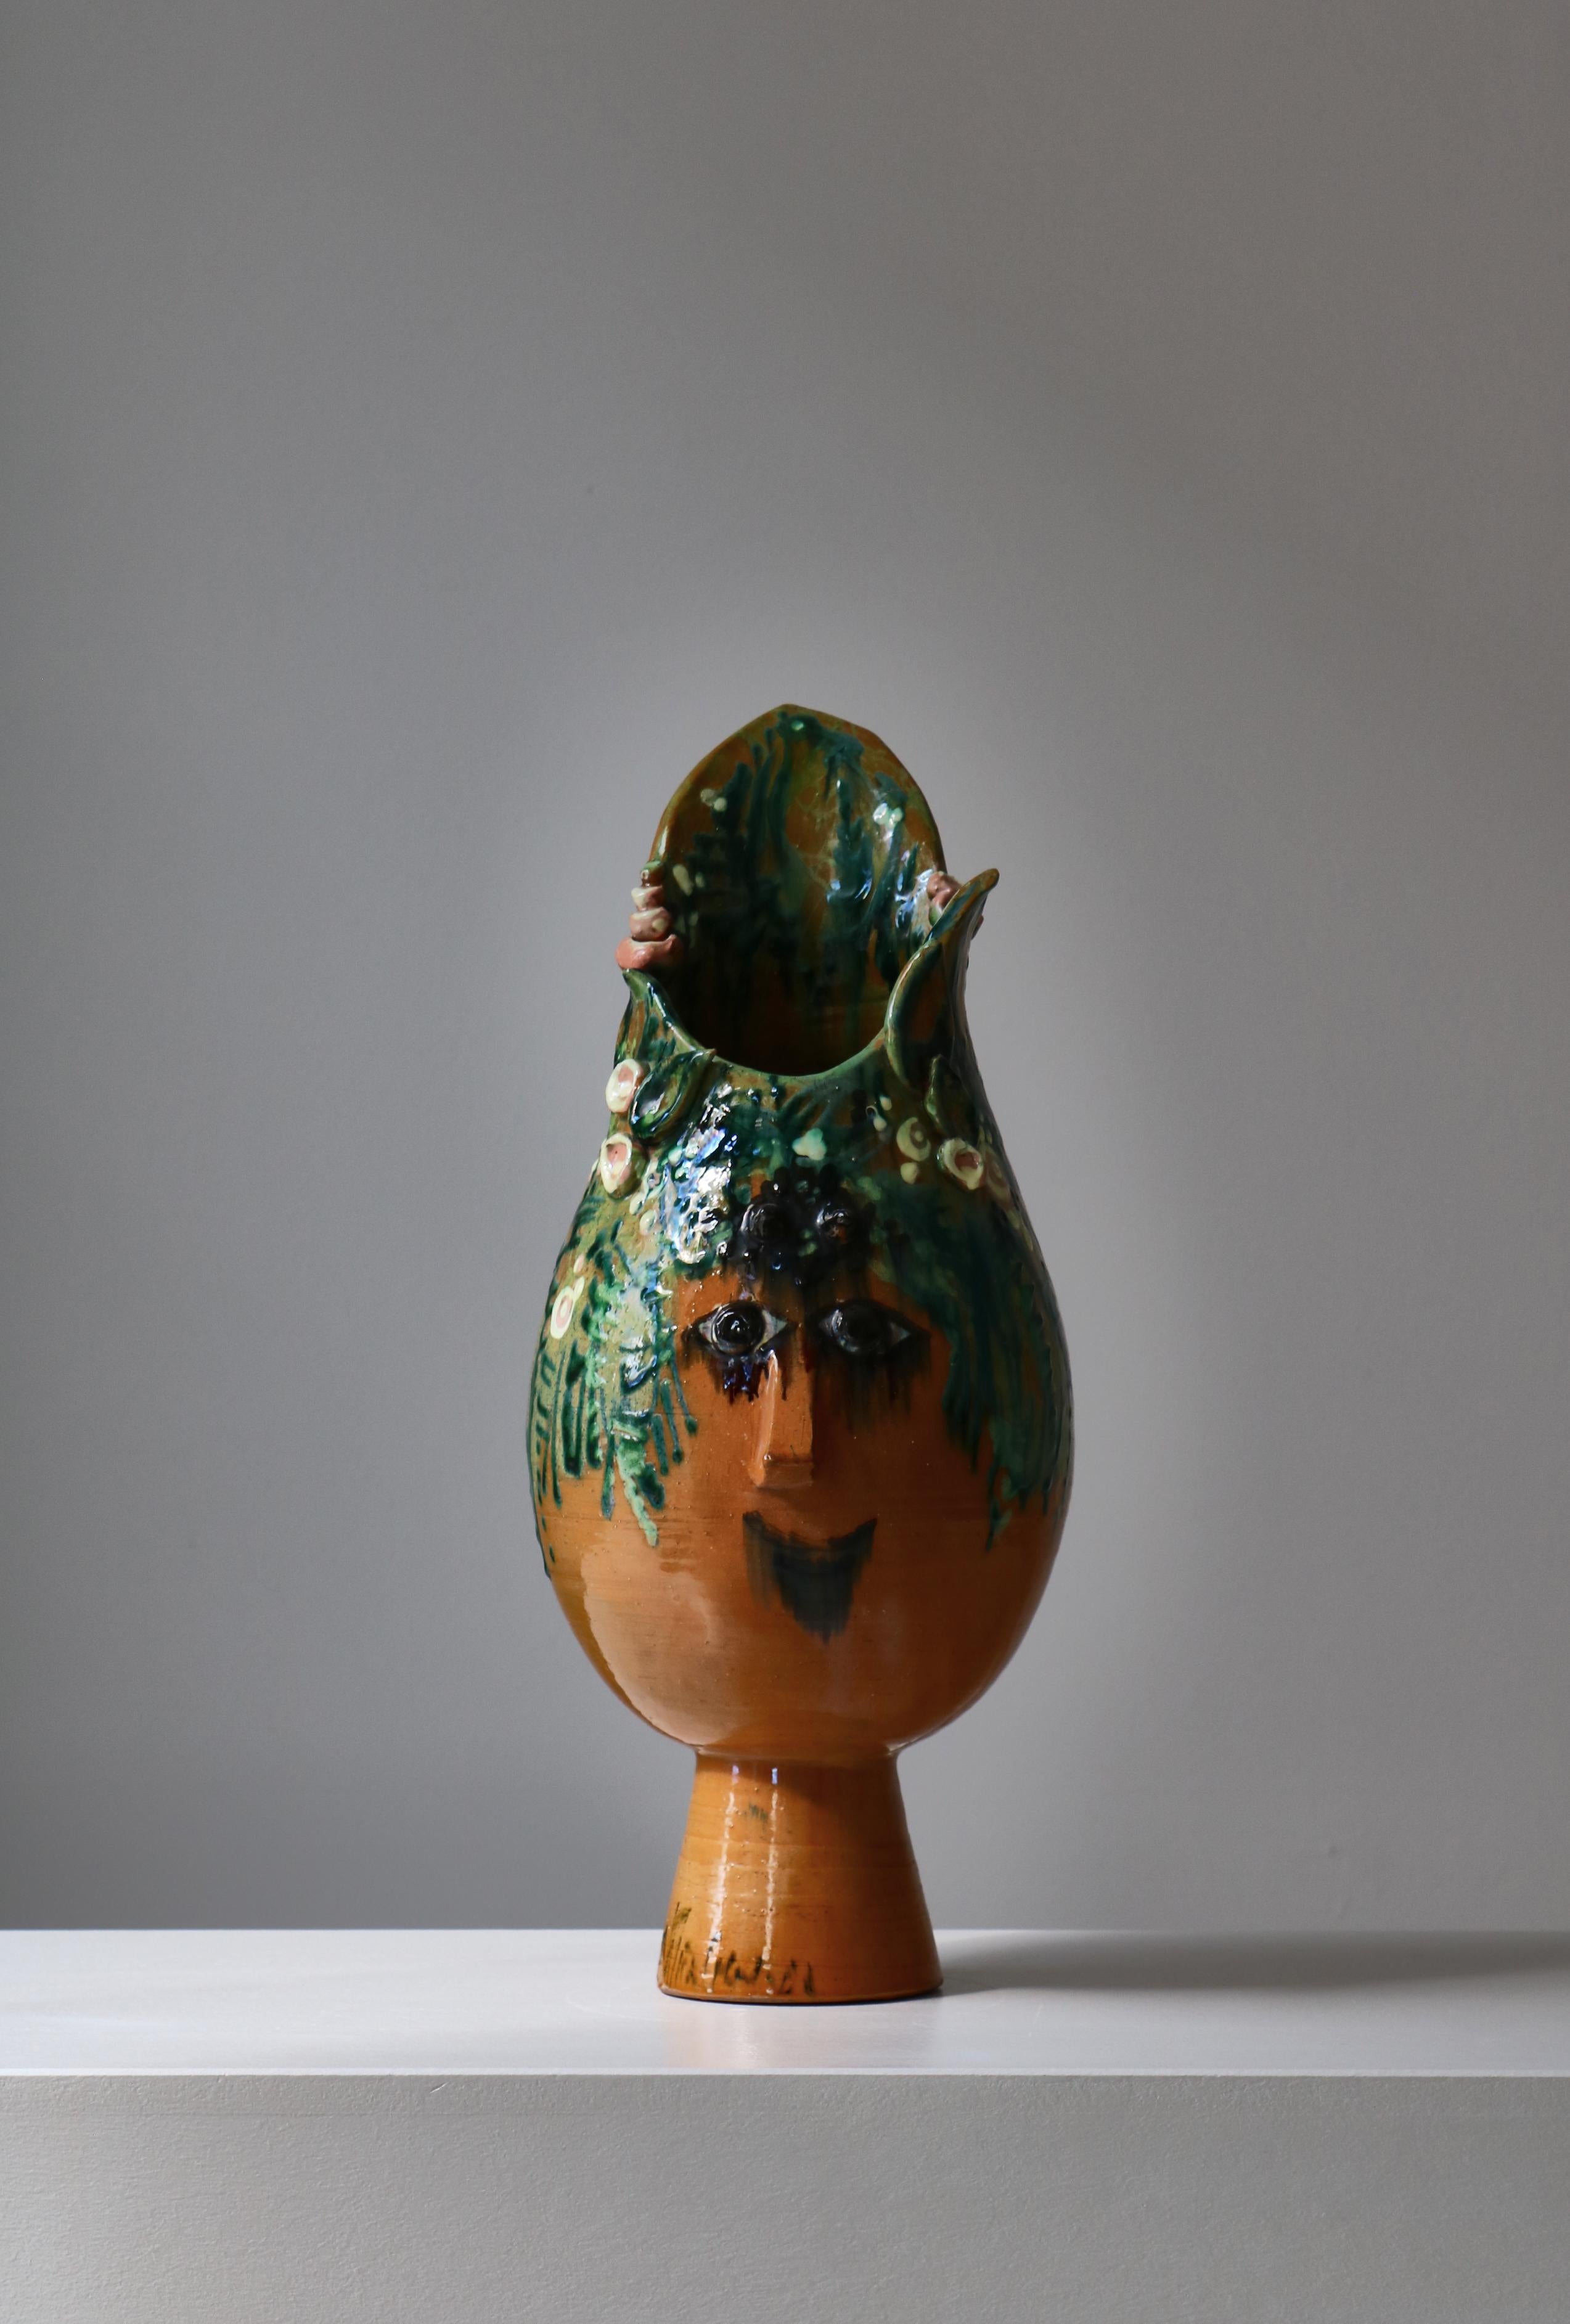 Wonderful unique head vase handmade by Bjørn Wiinblad in 1961. Decorated in polychrome glazed earthenware. Very rare and early piece by one of Denmarks finest artist of the 20th century and a Danish Modern icon.
Similar head exhibited at 